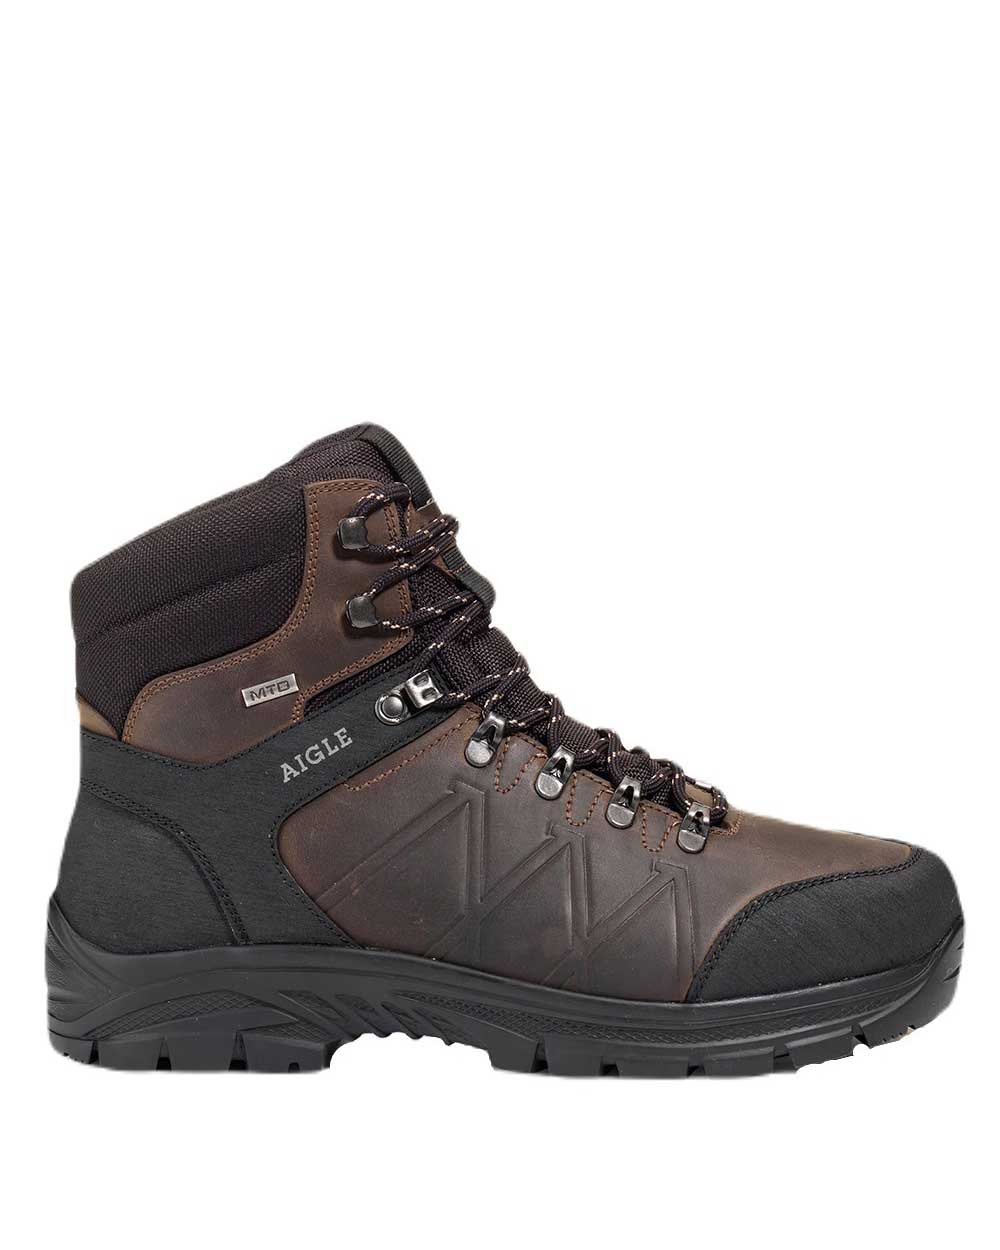 Aigle Klippe Leather Boots in Brown